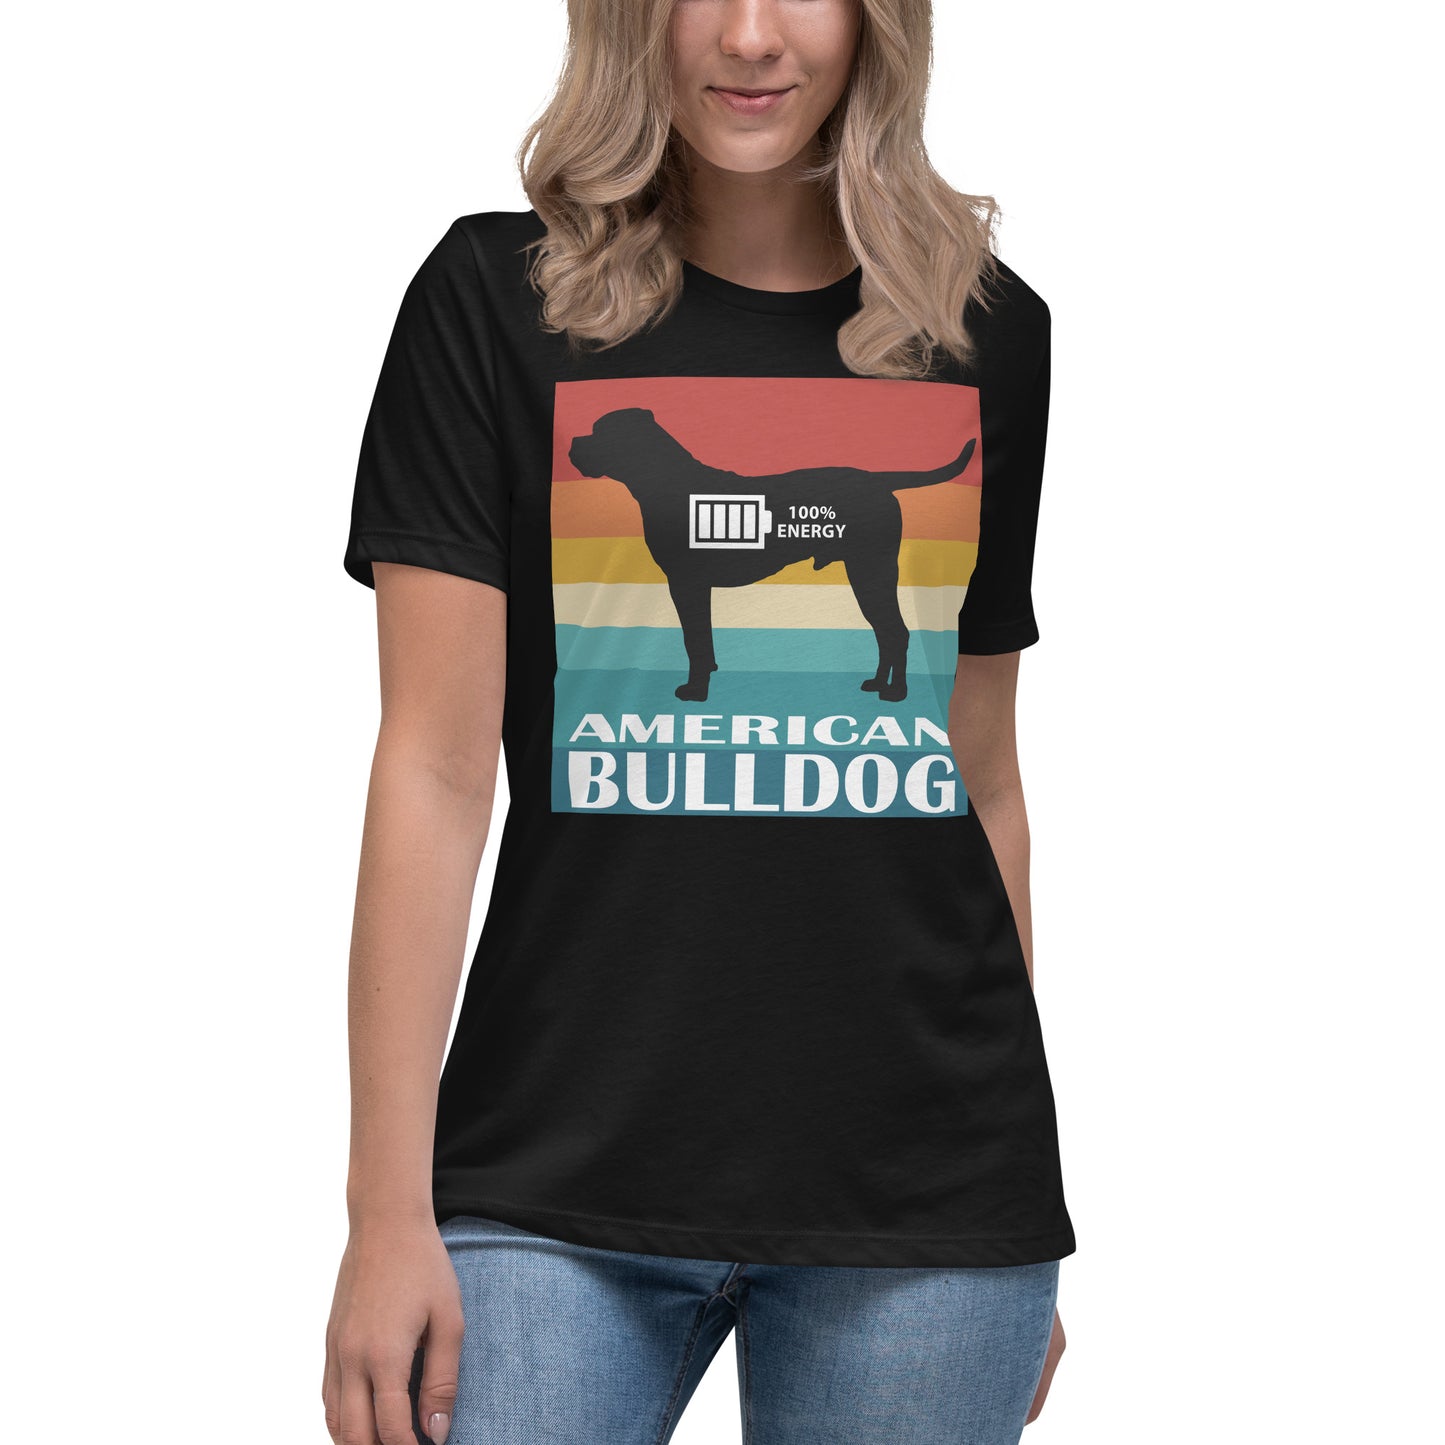 American Bulldog 100% Energy Women's Relaxed T-Shirt by Dog Artistry